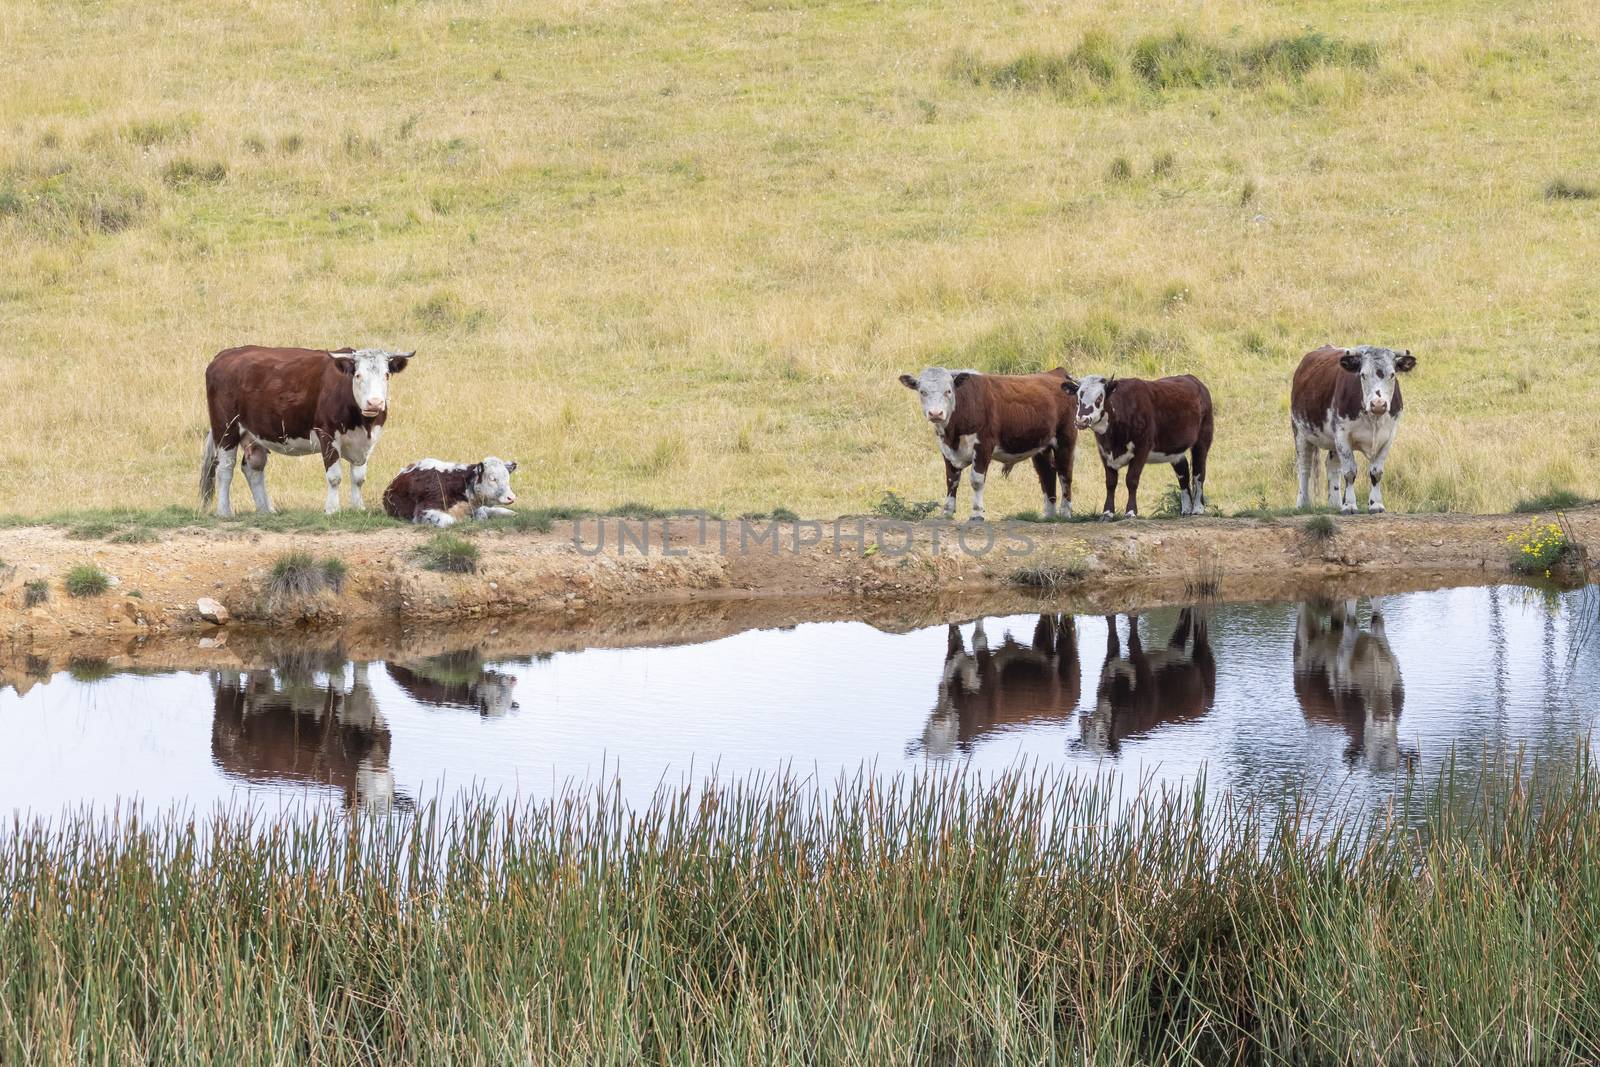 Cows at a watering hole in a large grassy agricultural field by WittkePhotos